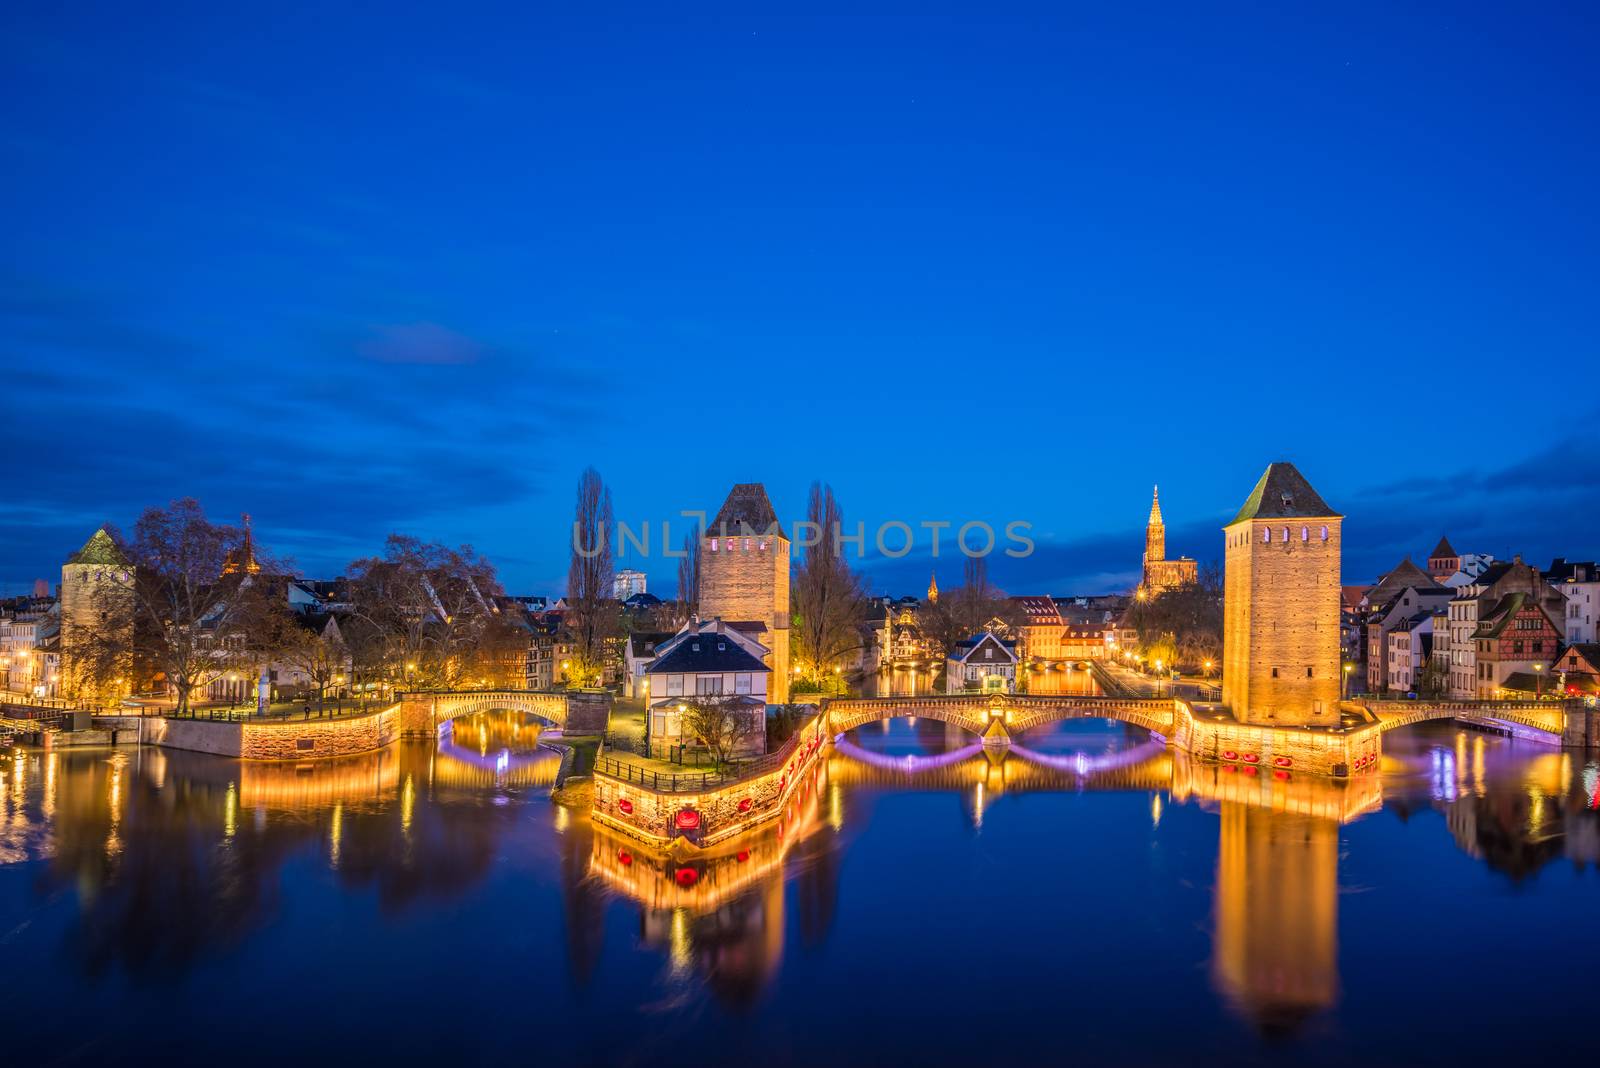 Tourist area "Petite France" in Strasbourg, France and covered bridges at night